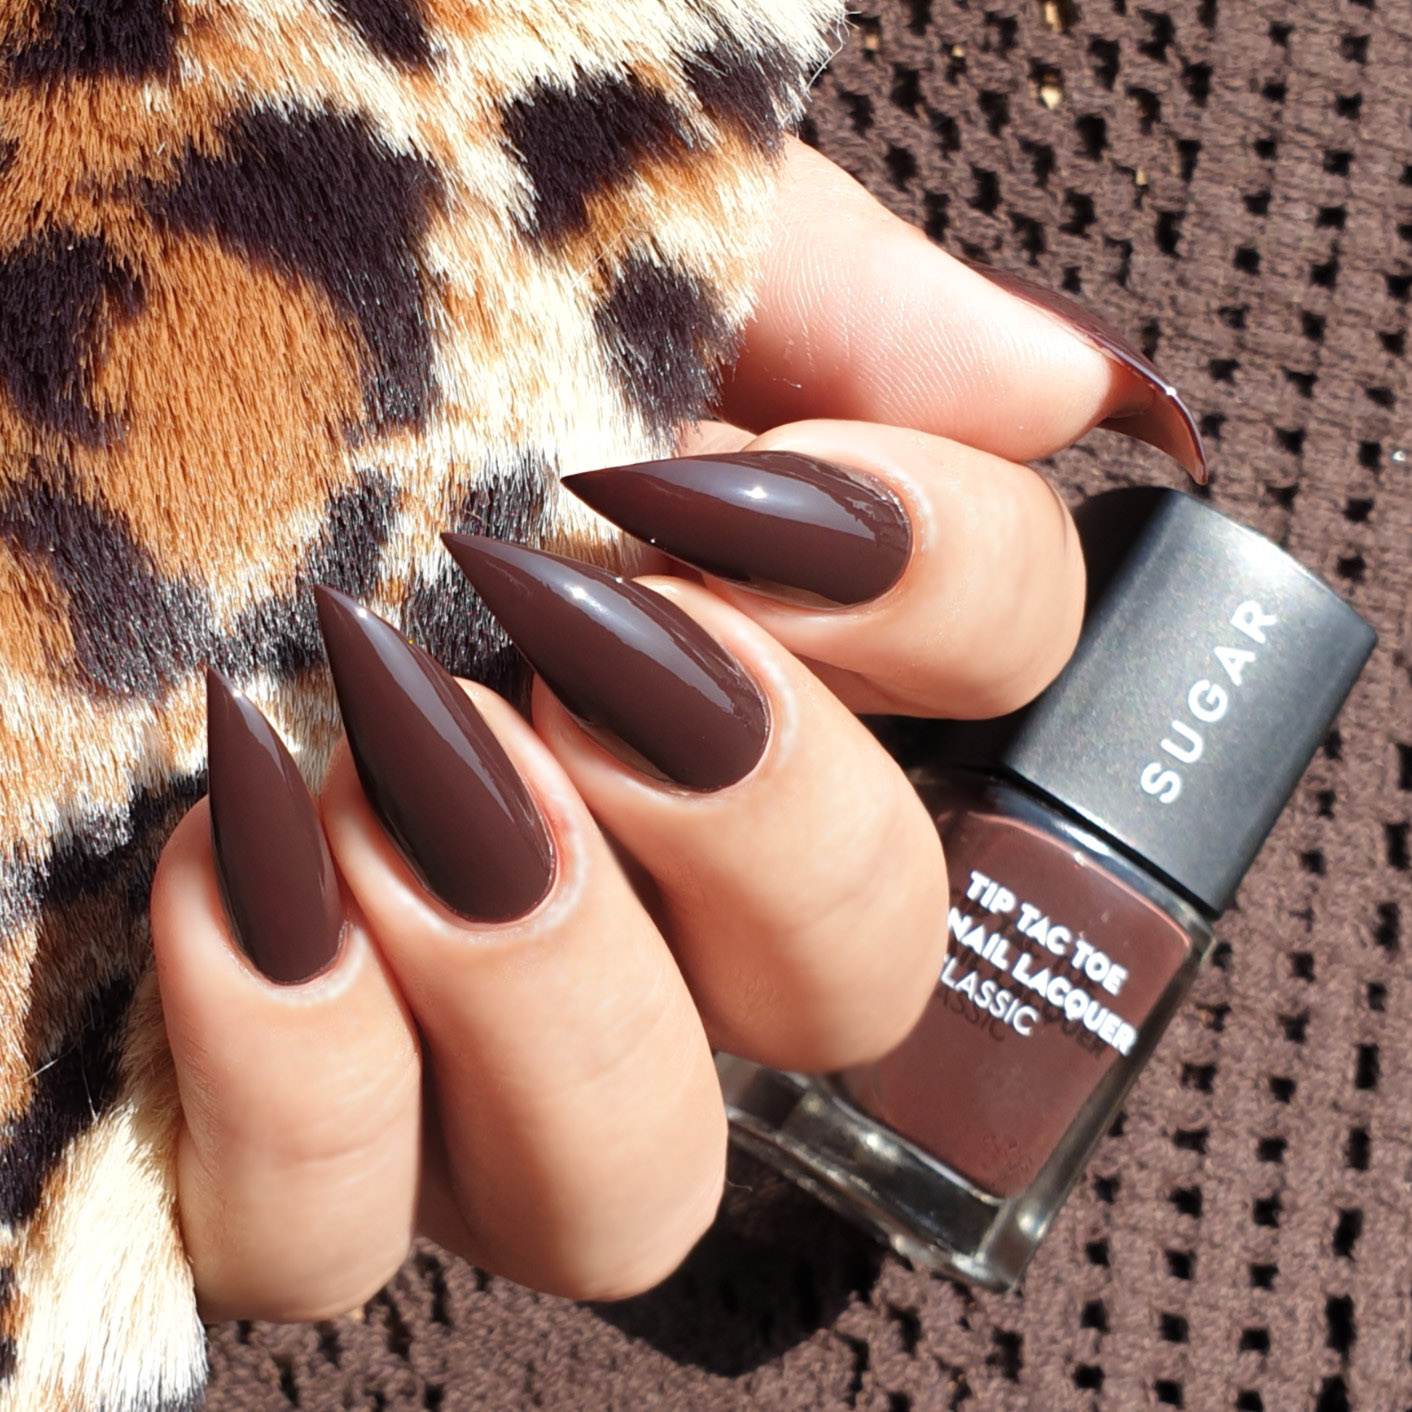 SUGAR Cosmetics - Adorn your tips with bronze shimmer :star2:like  @truefashionholic! Swipe on this deep rustic glaze, ( 074) Beauty With  Bronze, from #Newlaunched Tip Tac Toe Nail Lacquer Collection- The Arabian